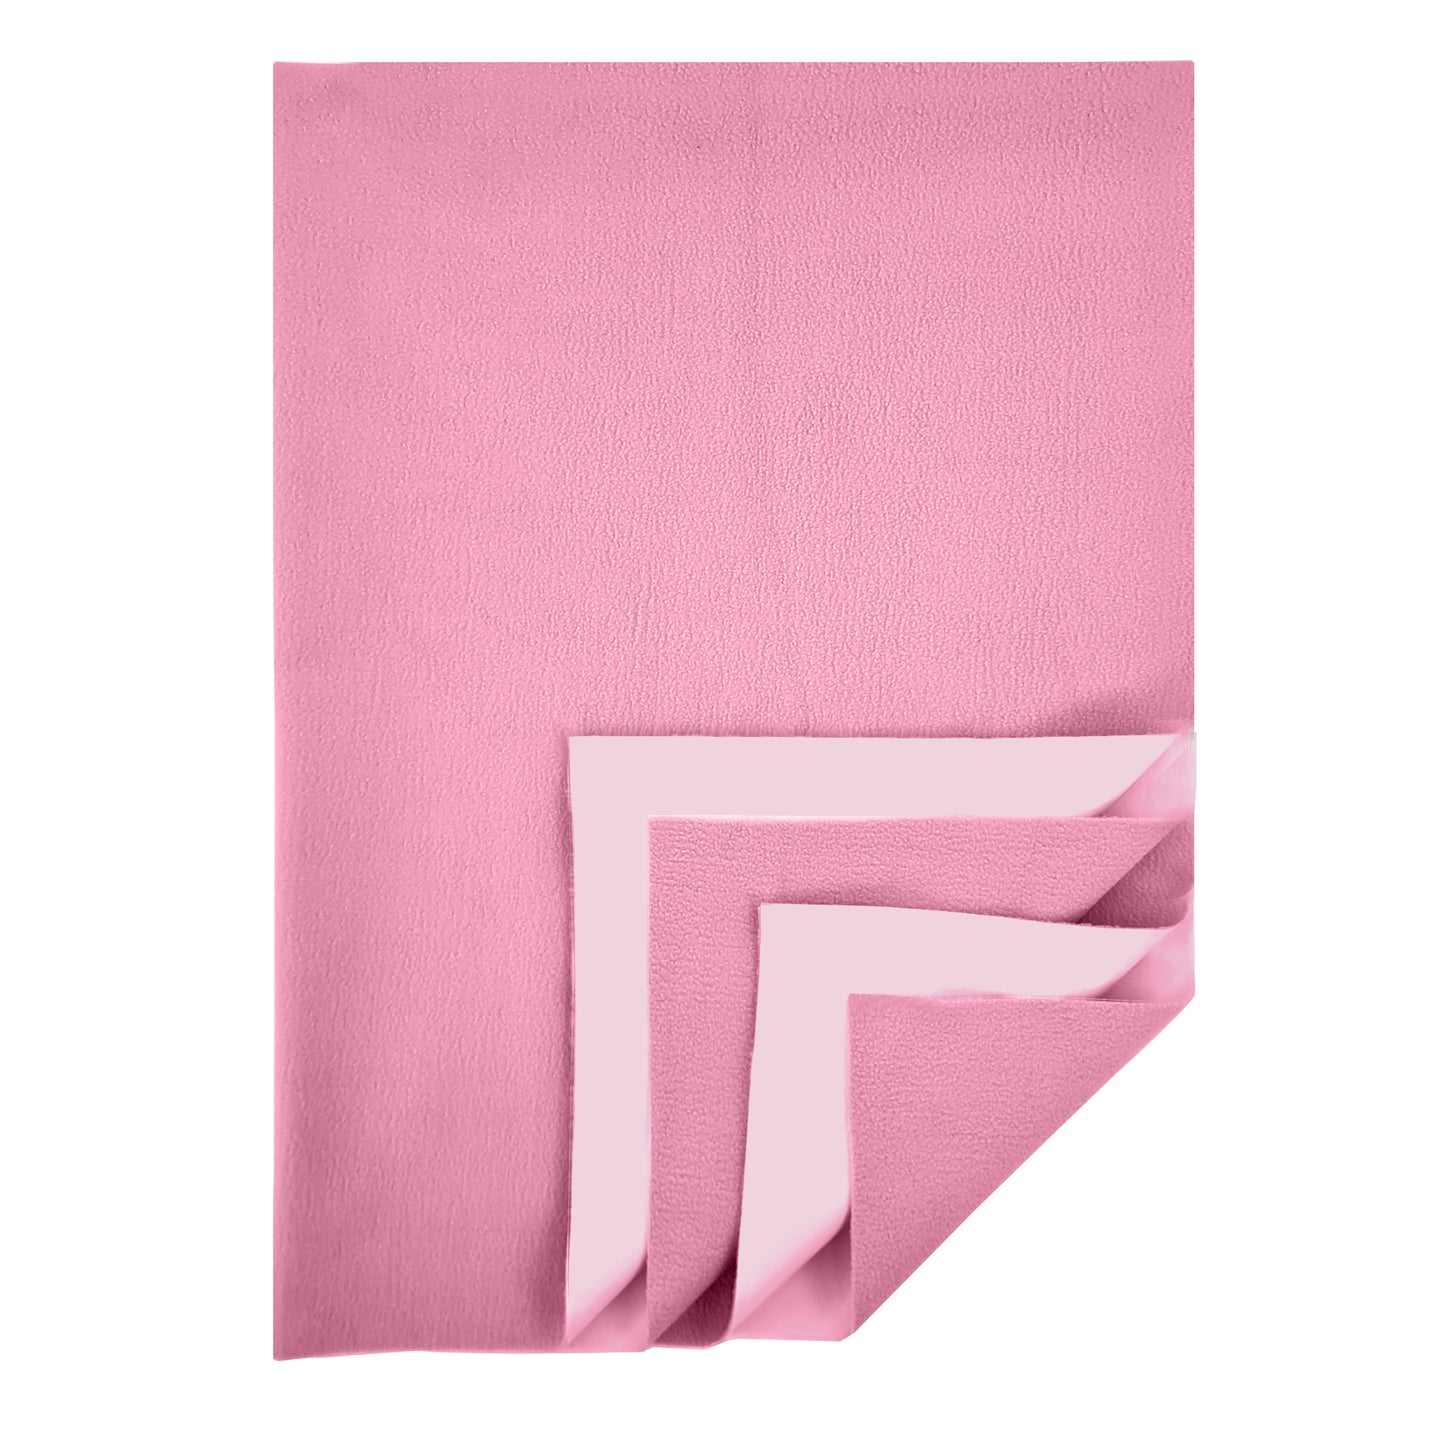 Waterproof Quick Dry Protector Sheet, Baby Bed Protector (140 X 100 CM), Pack of 1 -PINK